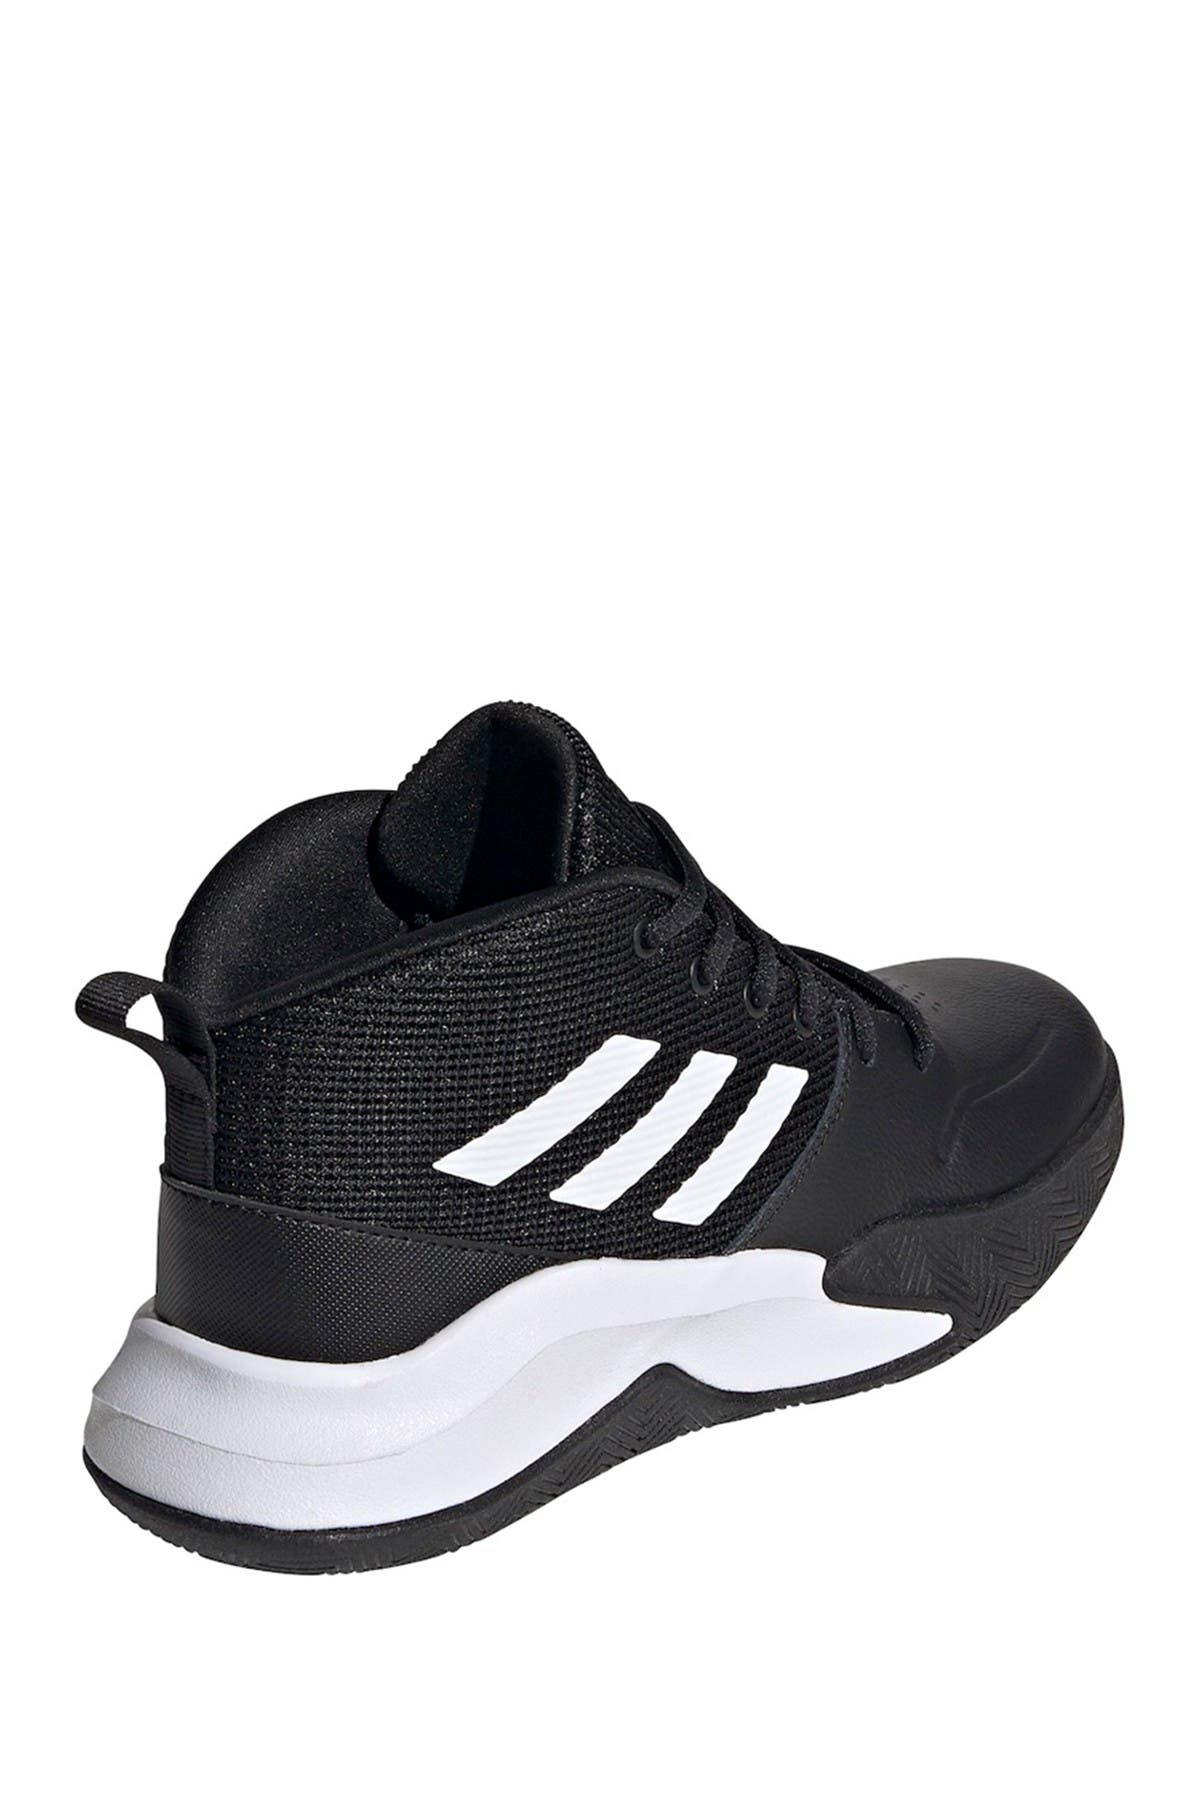 adidas own the game wide shoes